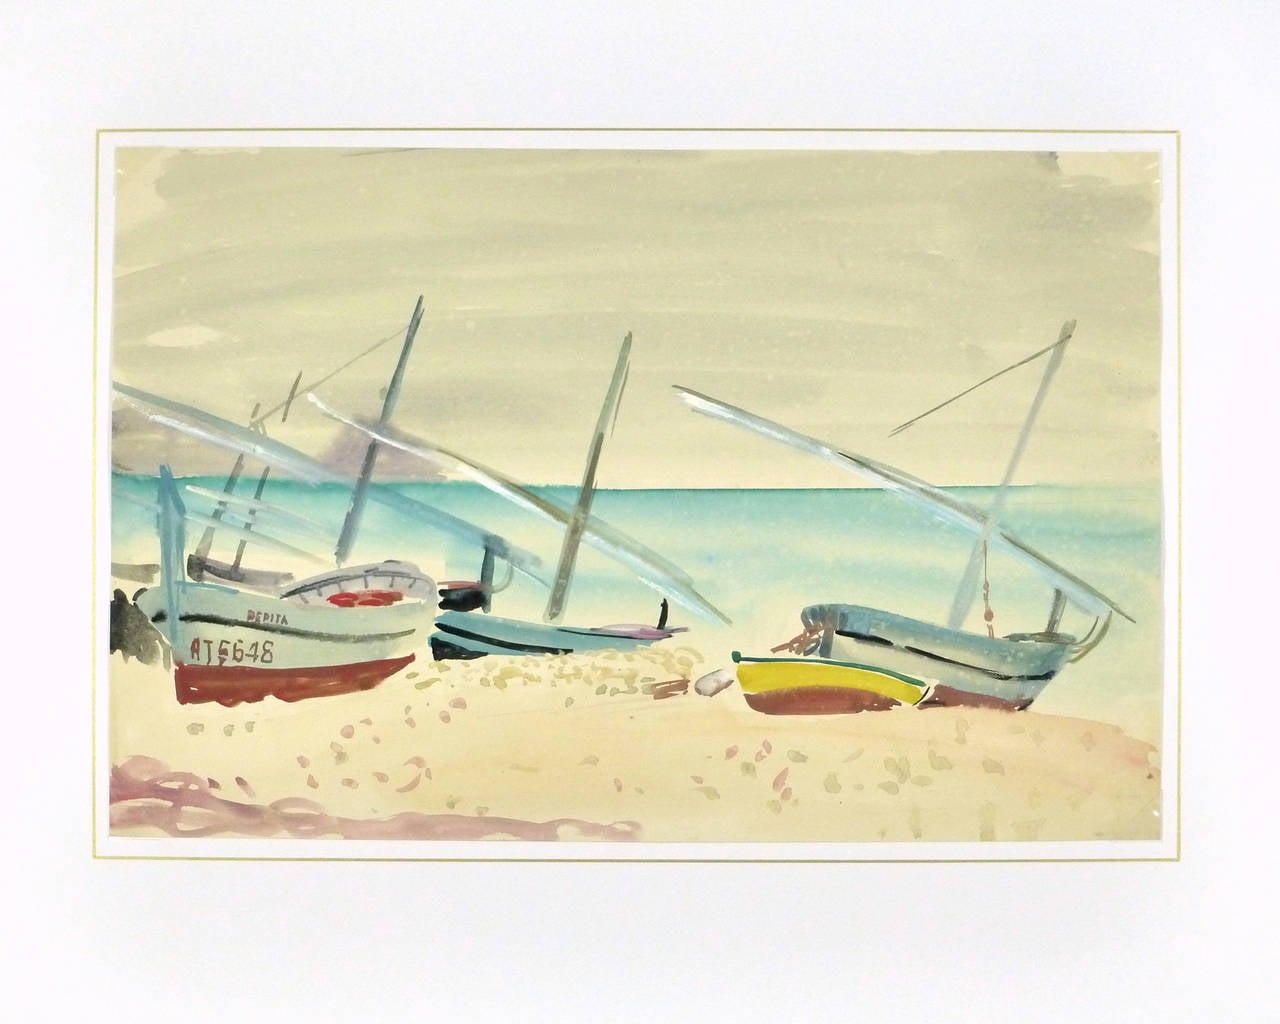 Spectacular watercolor seascape of colorful boats beached on the coast of Madagascar by French artist Stéphane Magnard, circa 1950. Unsigned.

Original vintage one-of-a-kind artwork on paper displayed on a white mat with a gold border. Mat fits a